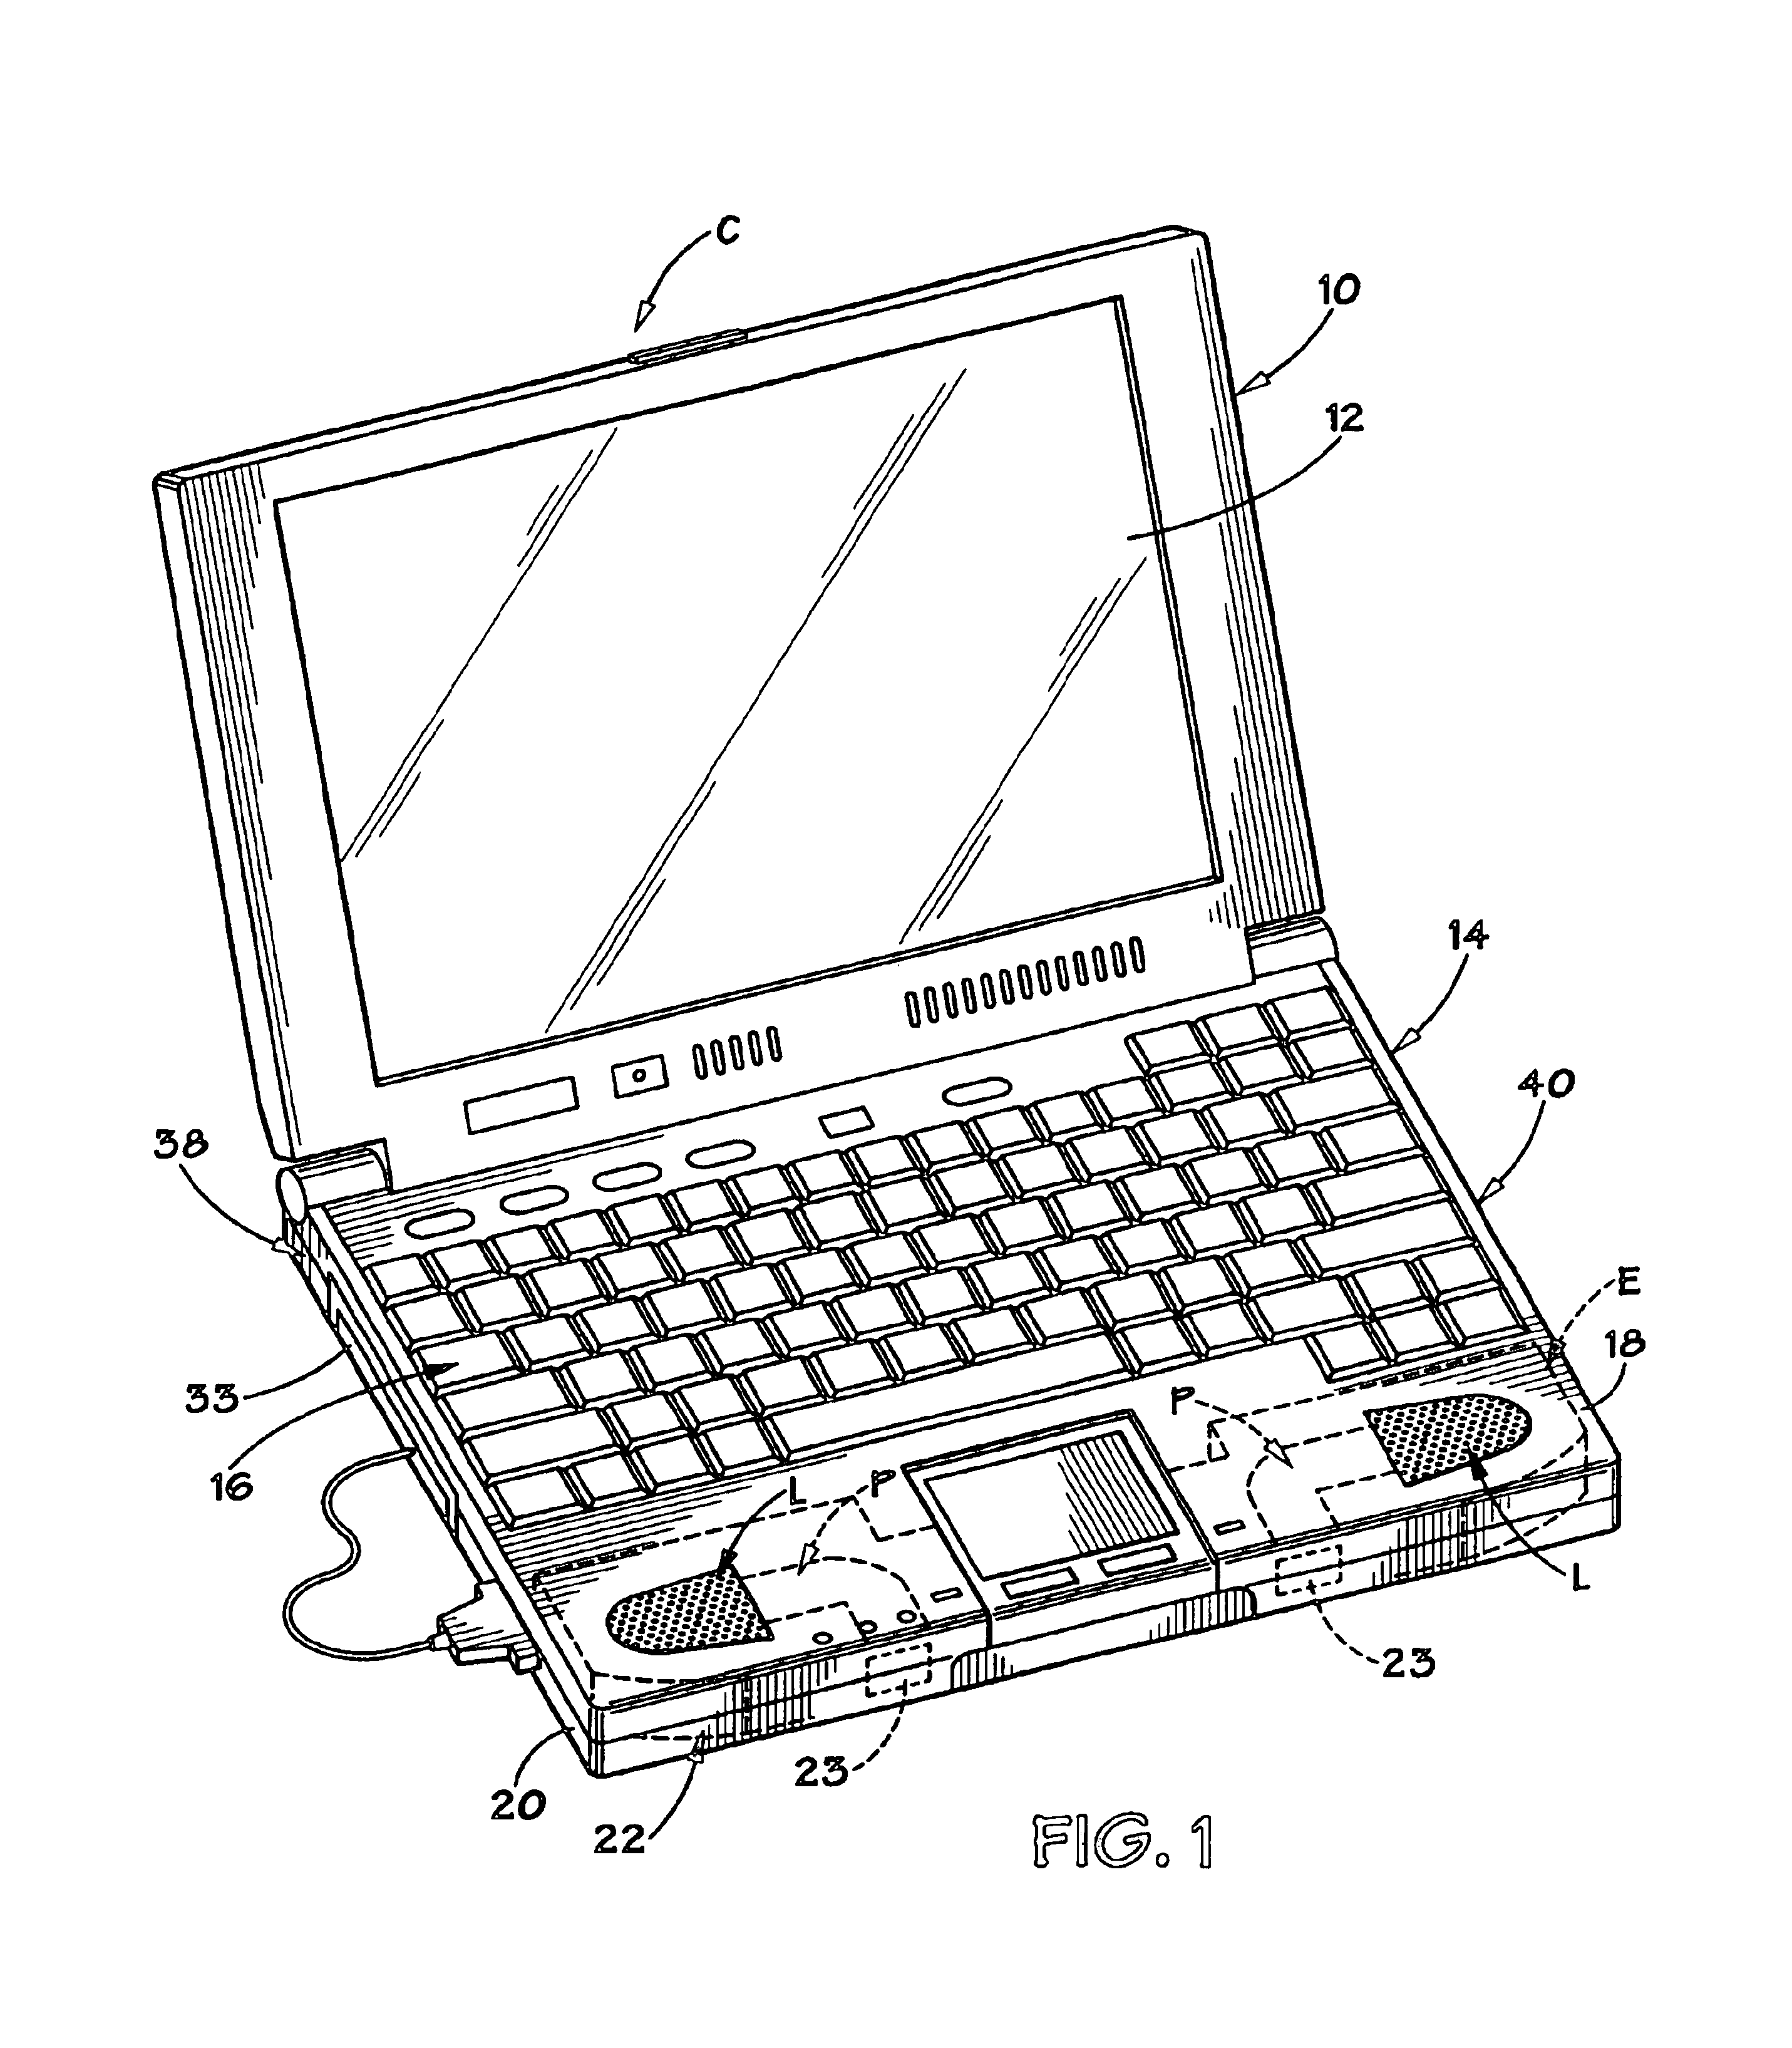 Ported speaker enclosure of a portable computer